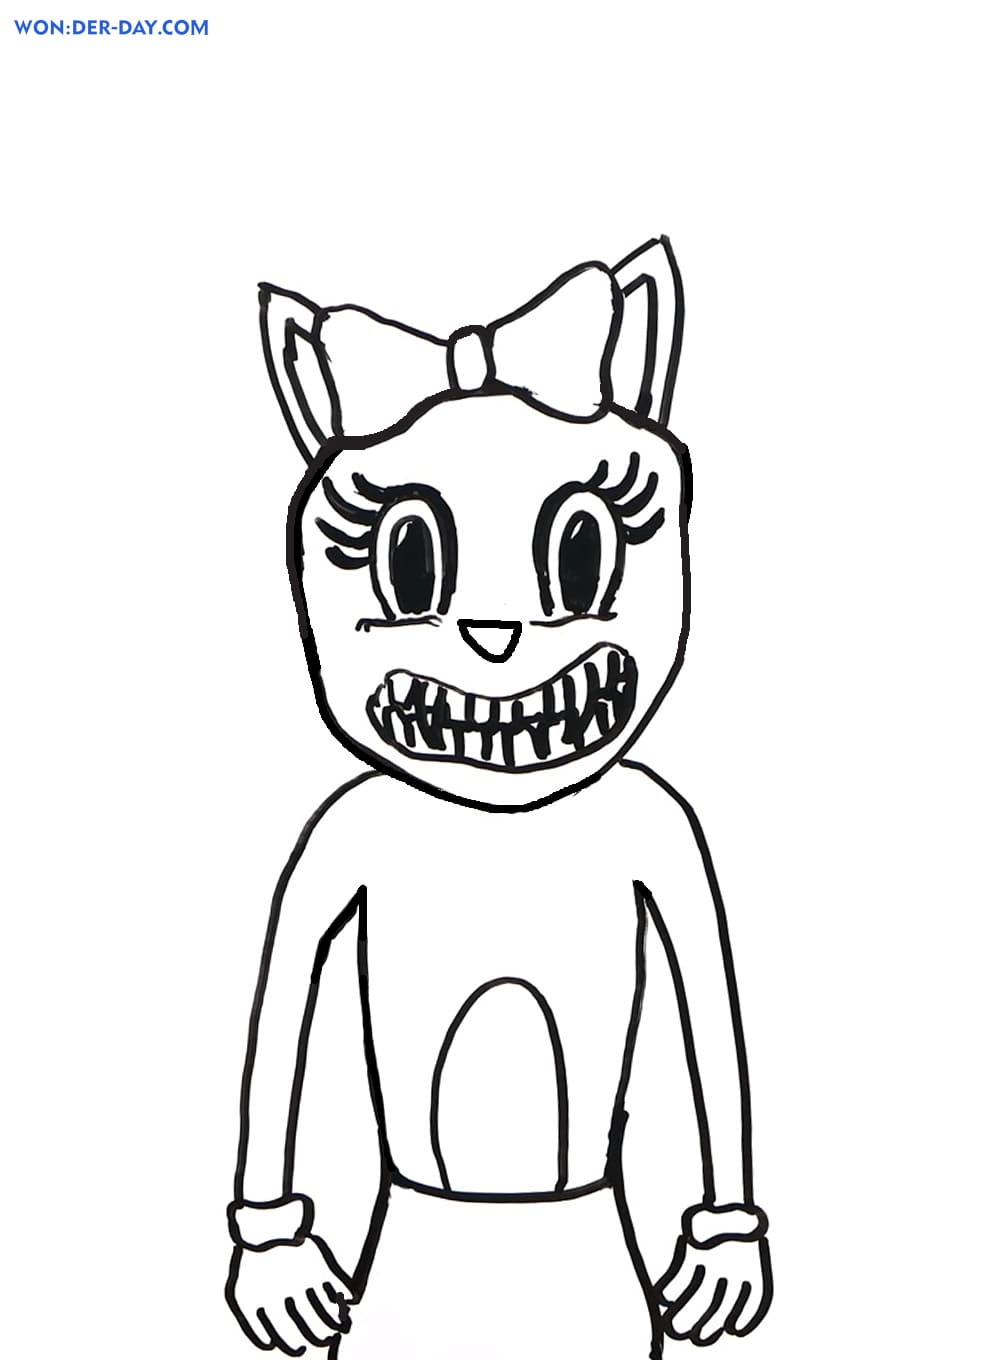 Cartoon Cat coloring pages for free printing — WONDER DAY — Coloring